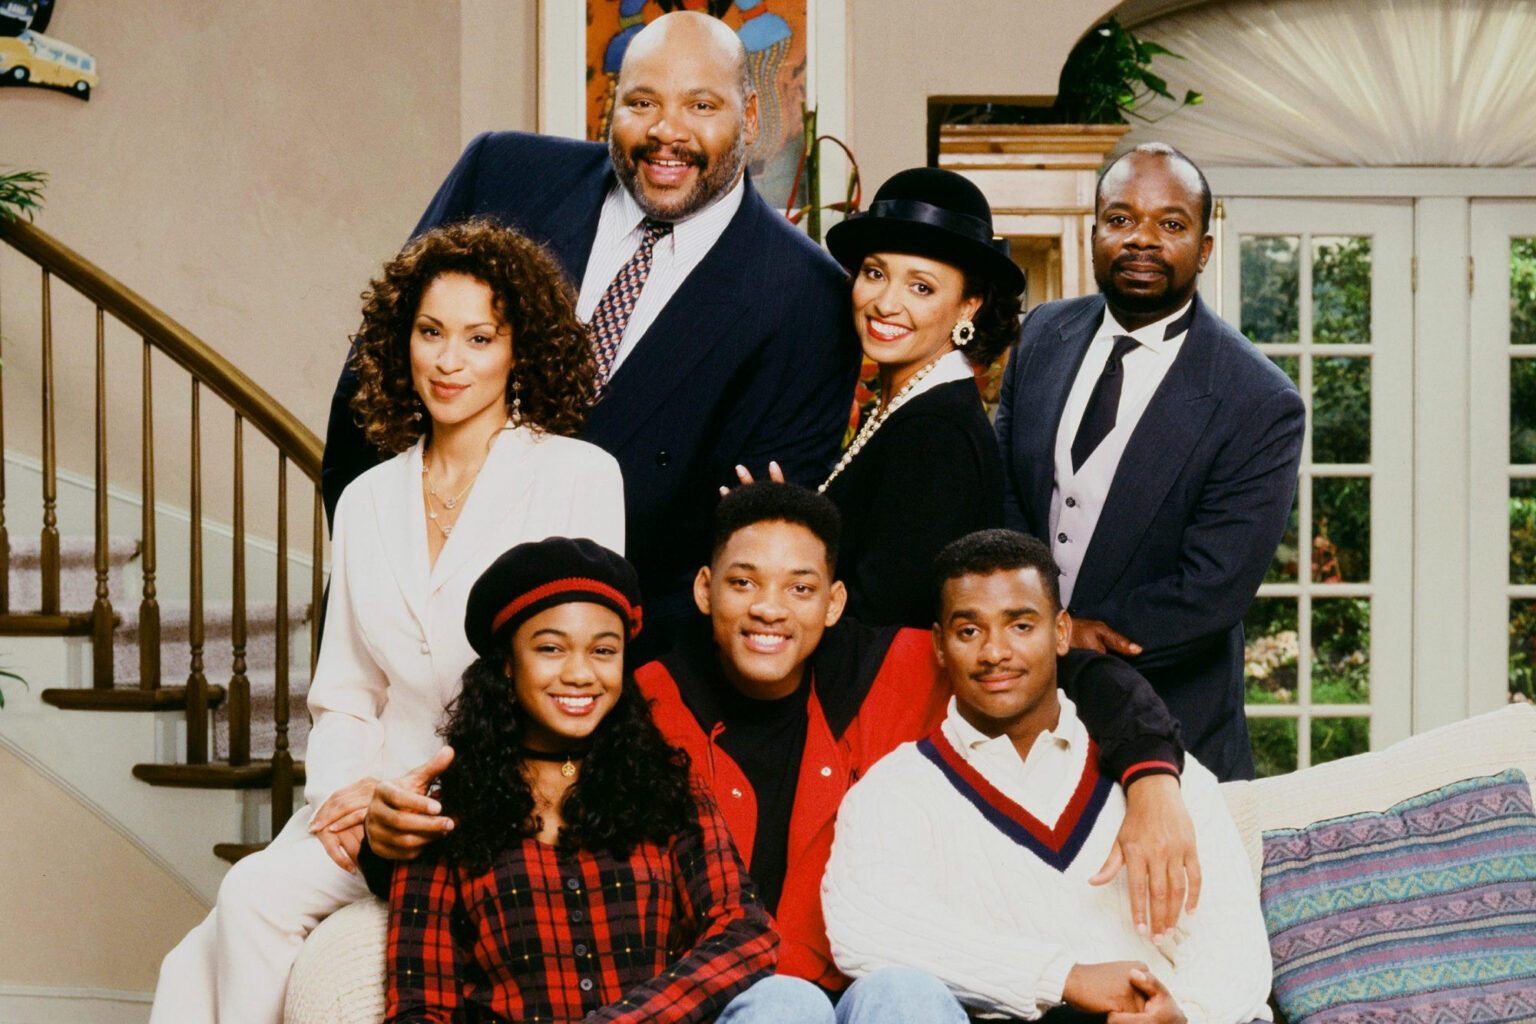 Did you see 'The Fresh Prince of Bel-Air' reboot trailer? Delve into the future of this dark reimagining that will flip the original sitcom upside down.